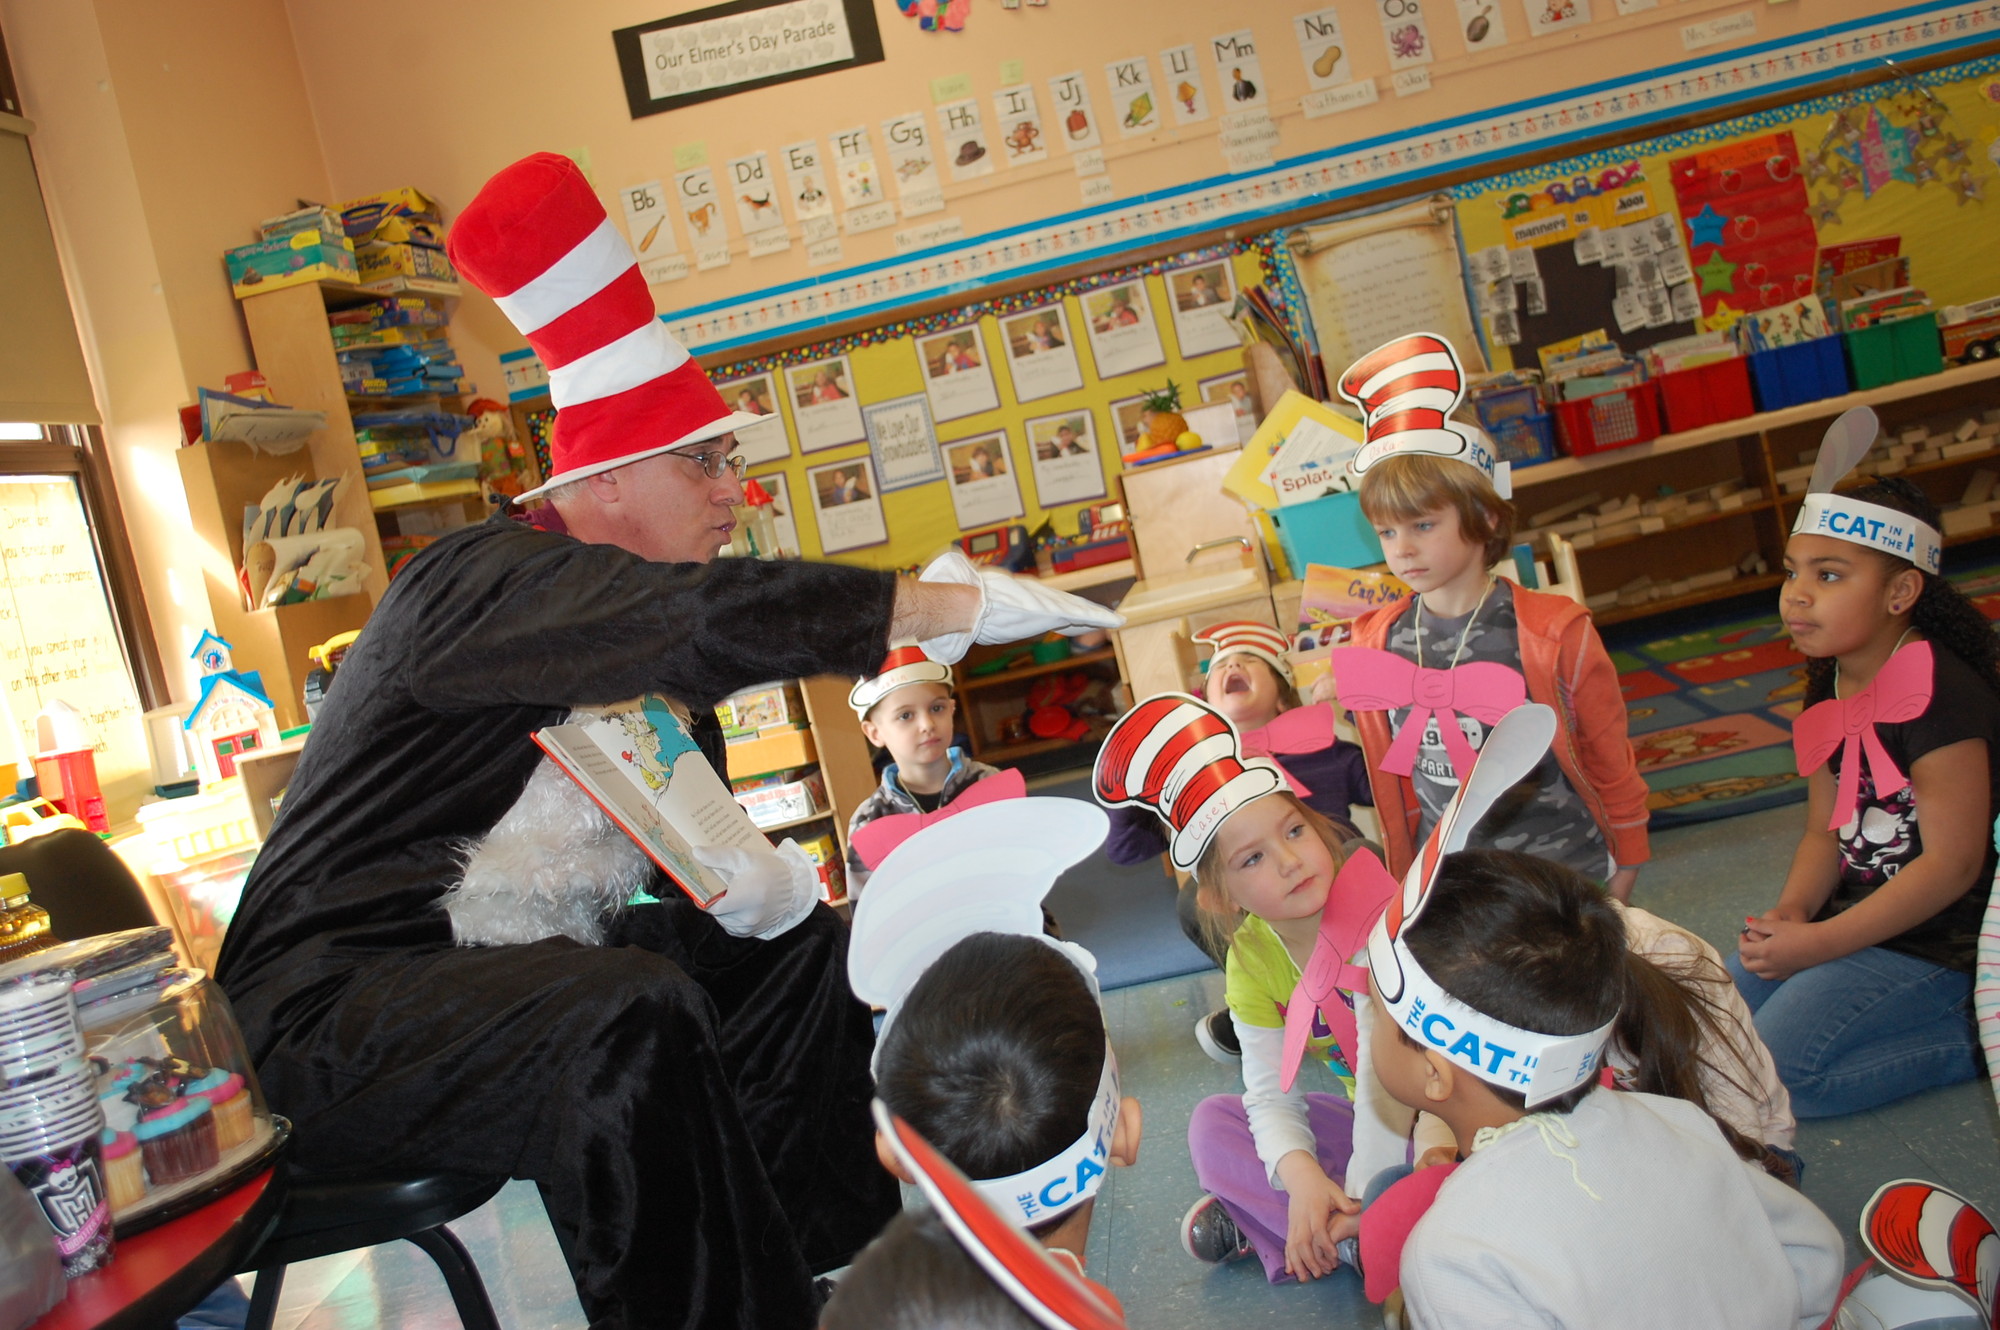 Richard Kerin, a.k.a. The Cat in the Hat, shared a tale with a kindergarten class at the William L. Buck School on March 6 for Read Across America Day.